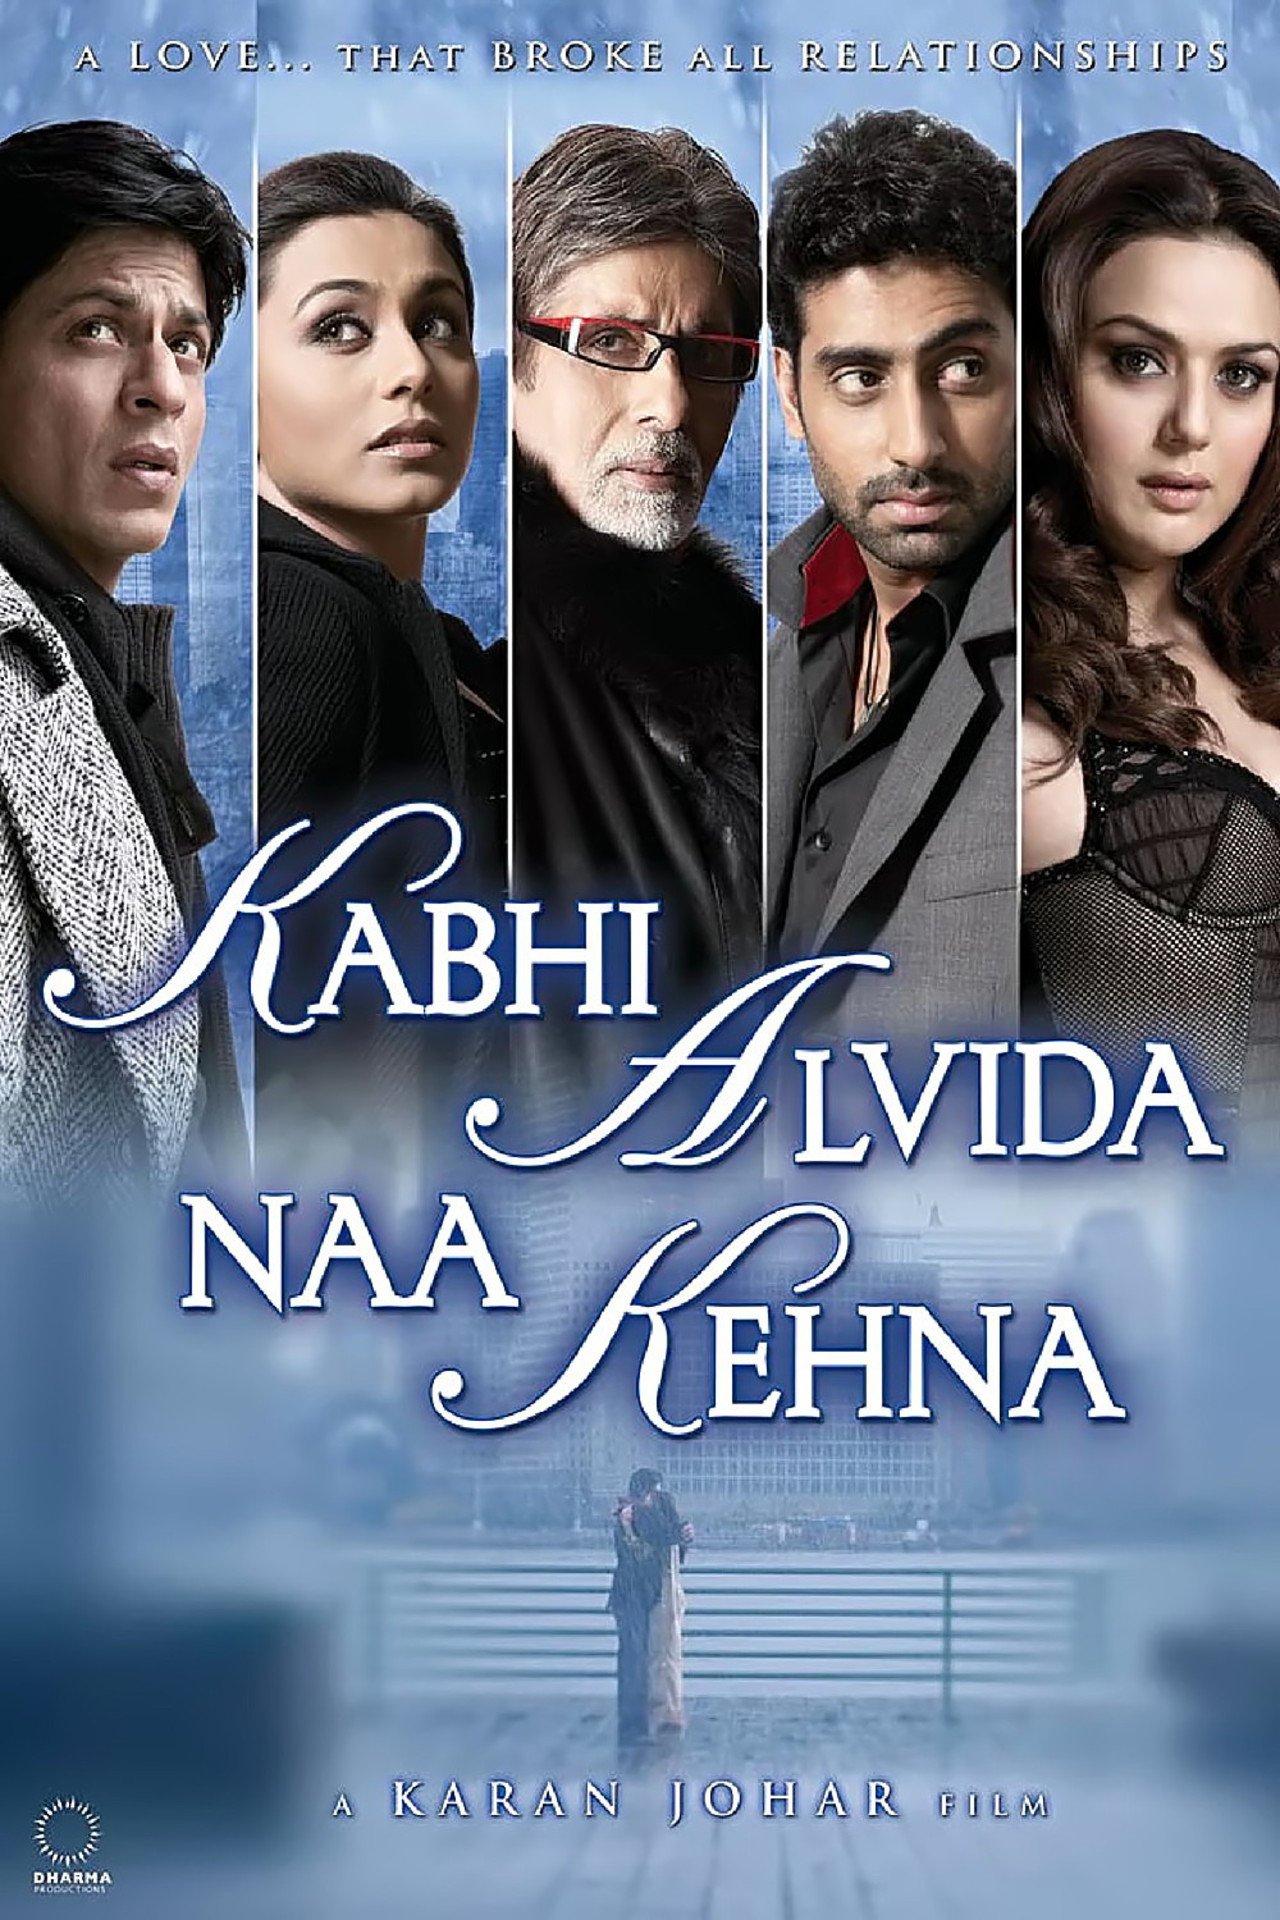 Kabhi Alvida Naa Kehna (2006) intricately weaves a tale of cross-cultural love, exploring the complexities of relationships. Dev (played by Shah Rukh Khan), a Hindu man, and Maya (portrayed by Rani Mukerji), a Christian woman, discover solace and understanding in each other's embrace, despite being married to other partners